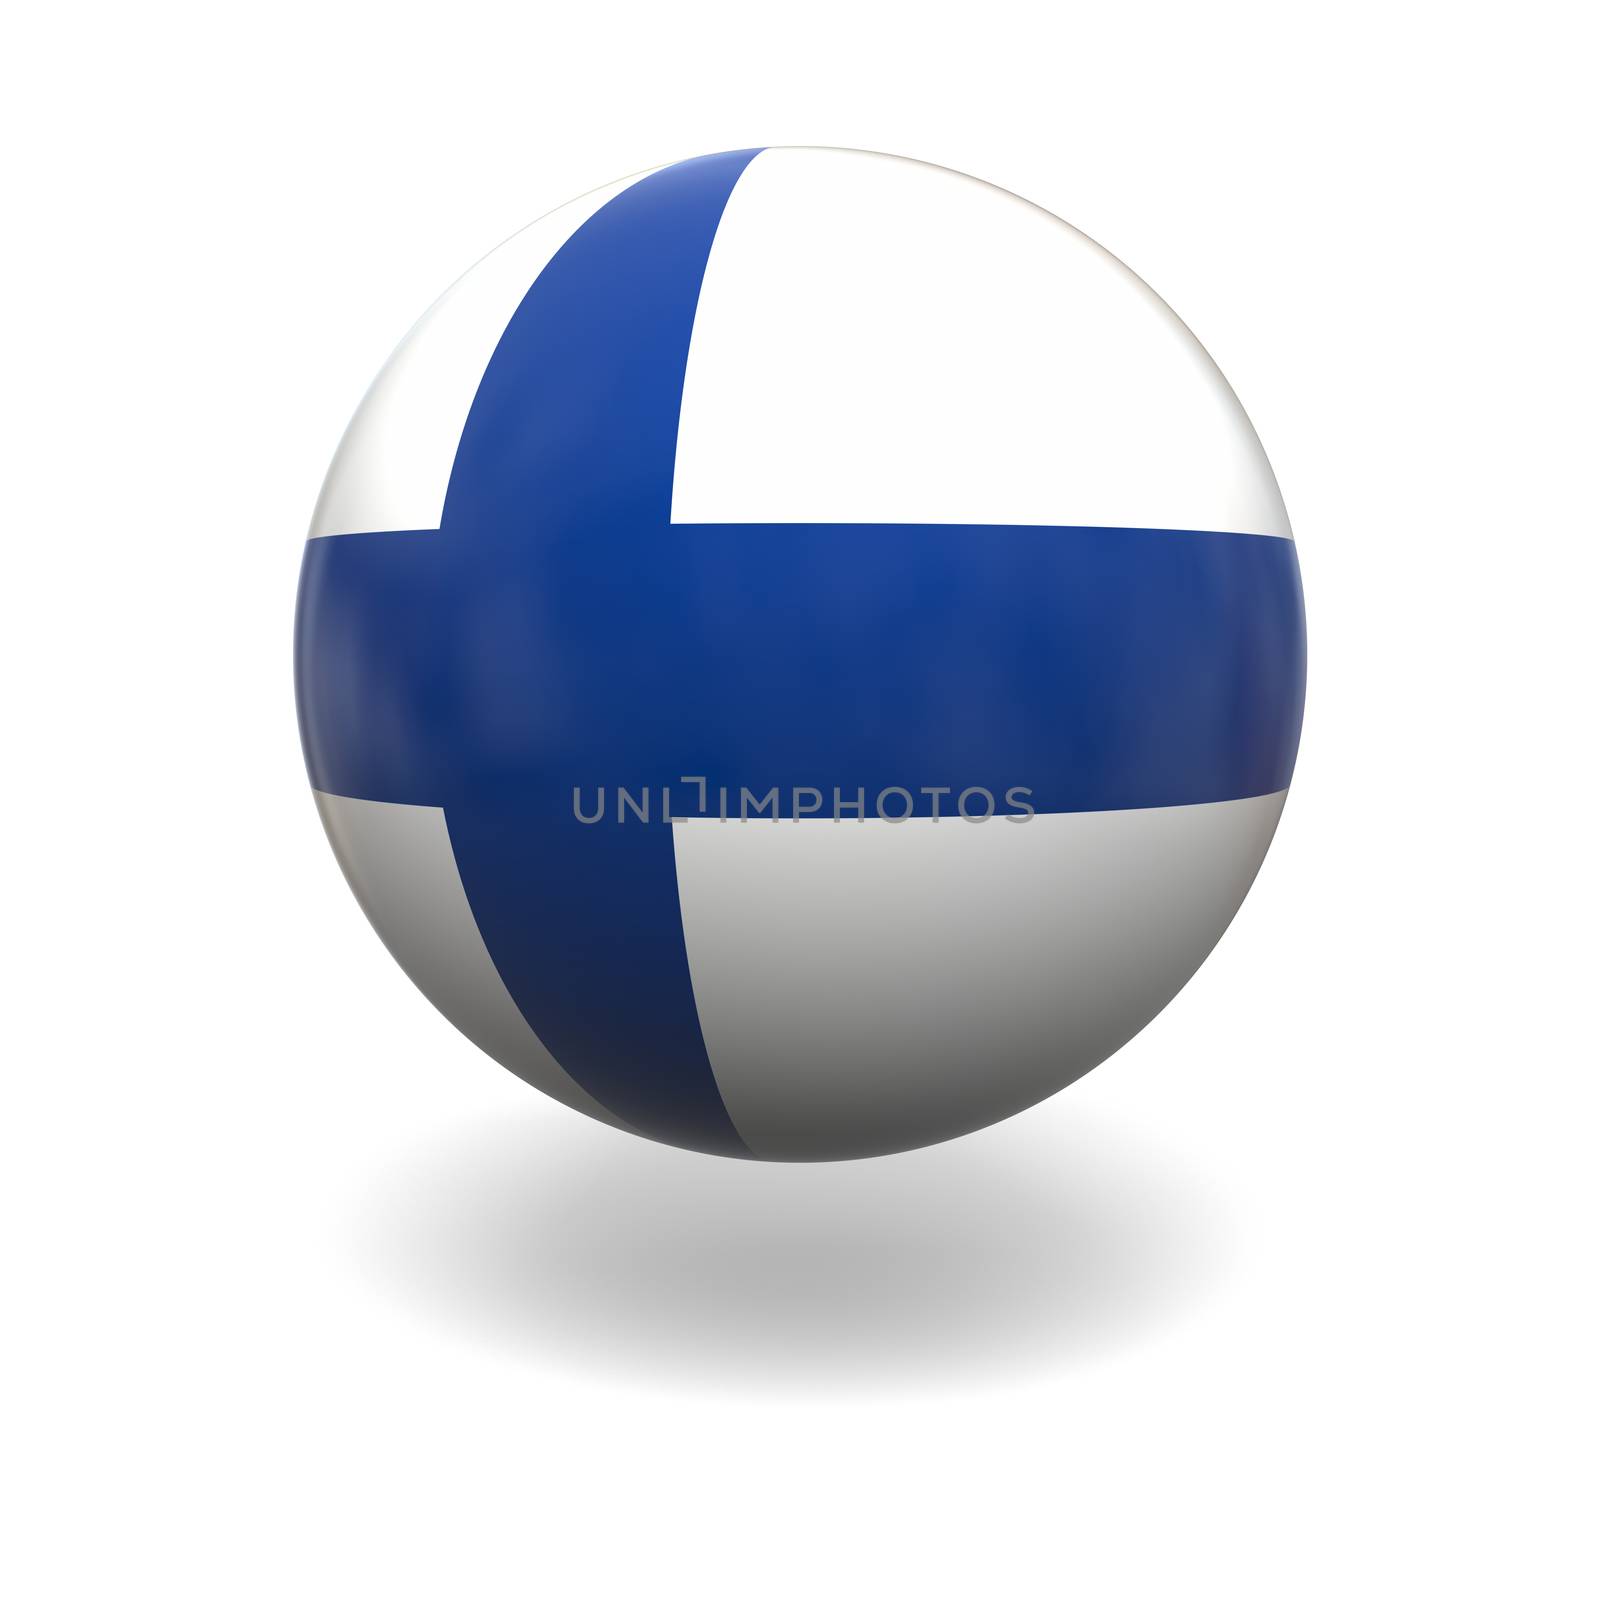 Finnish flag by Harvepino